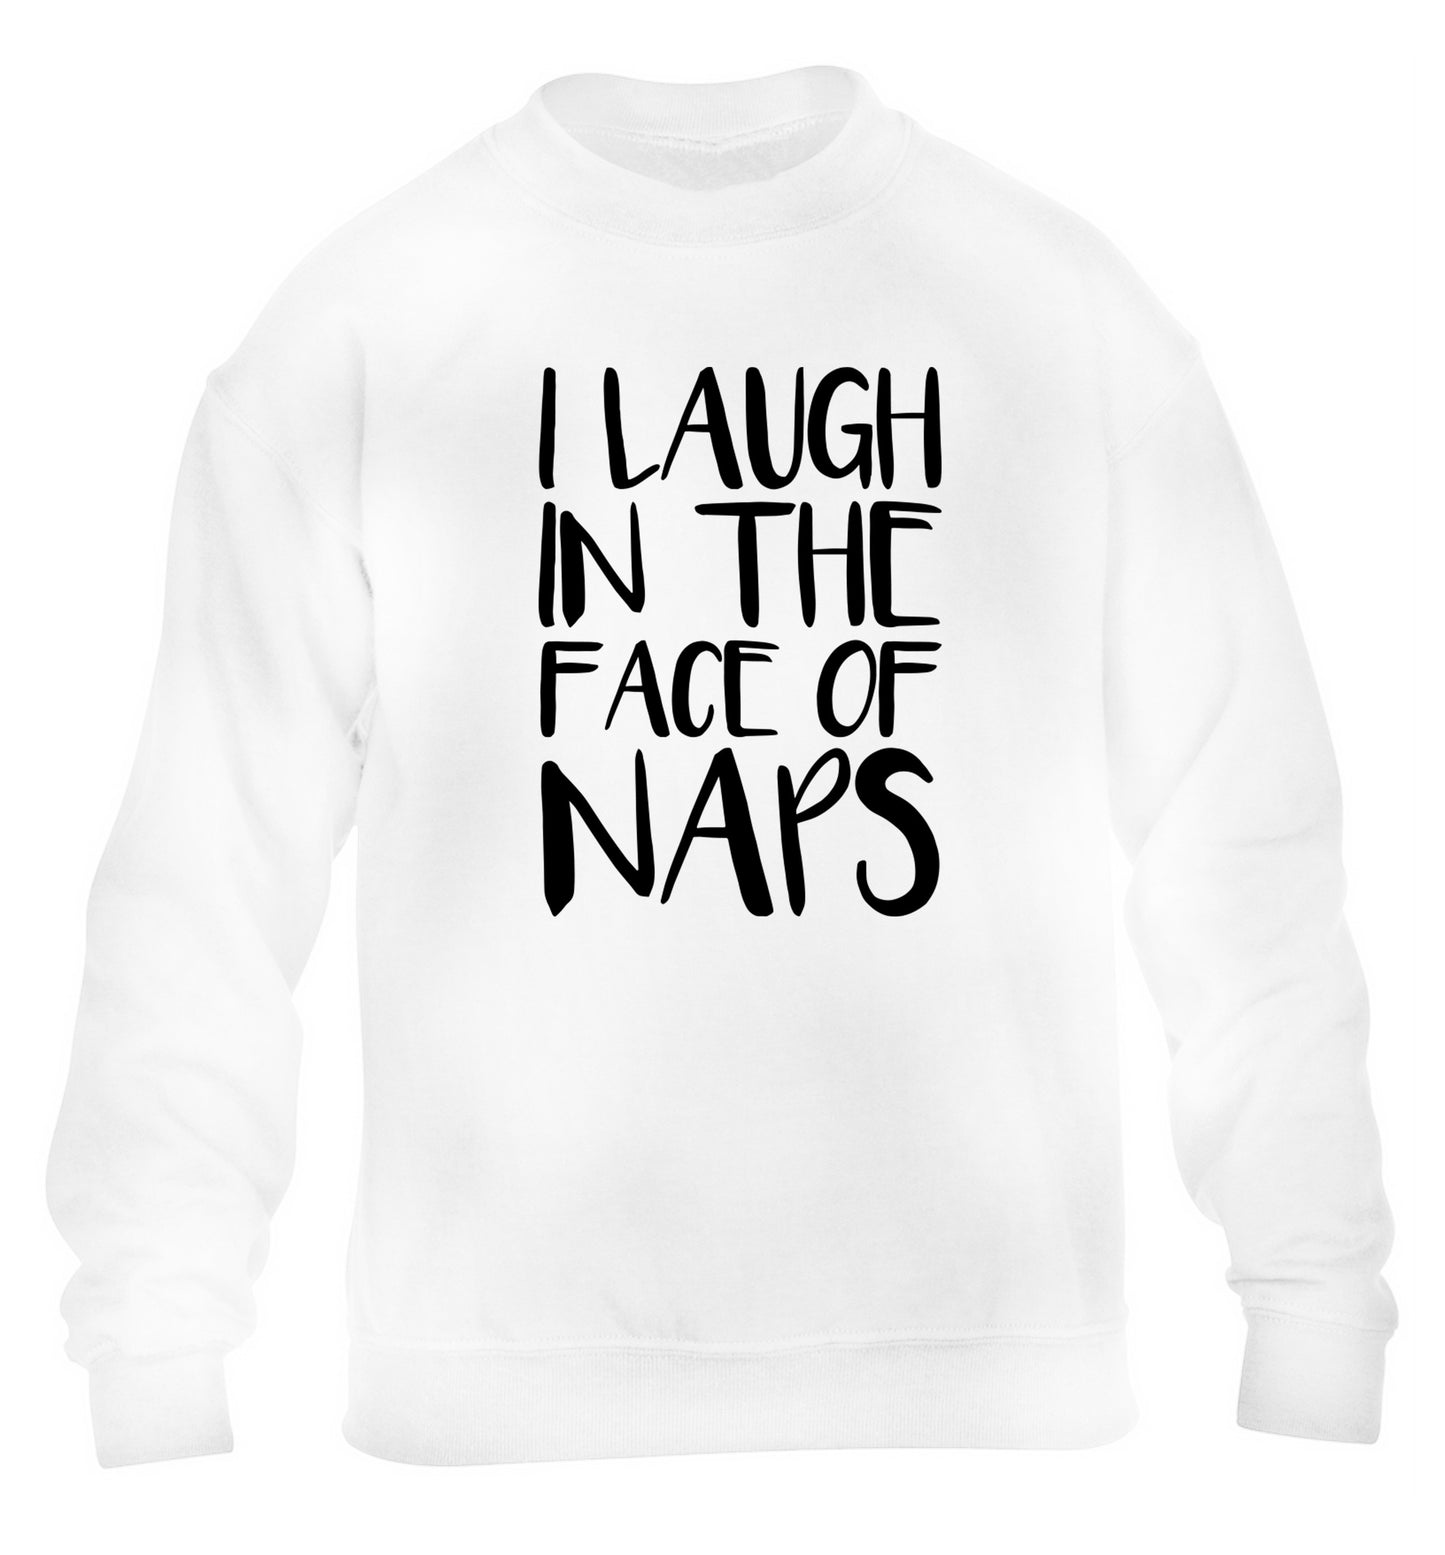 I laugh in the face of naps children's white sweater 12-14 Years